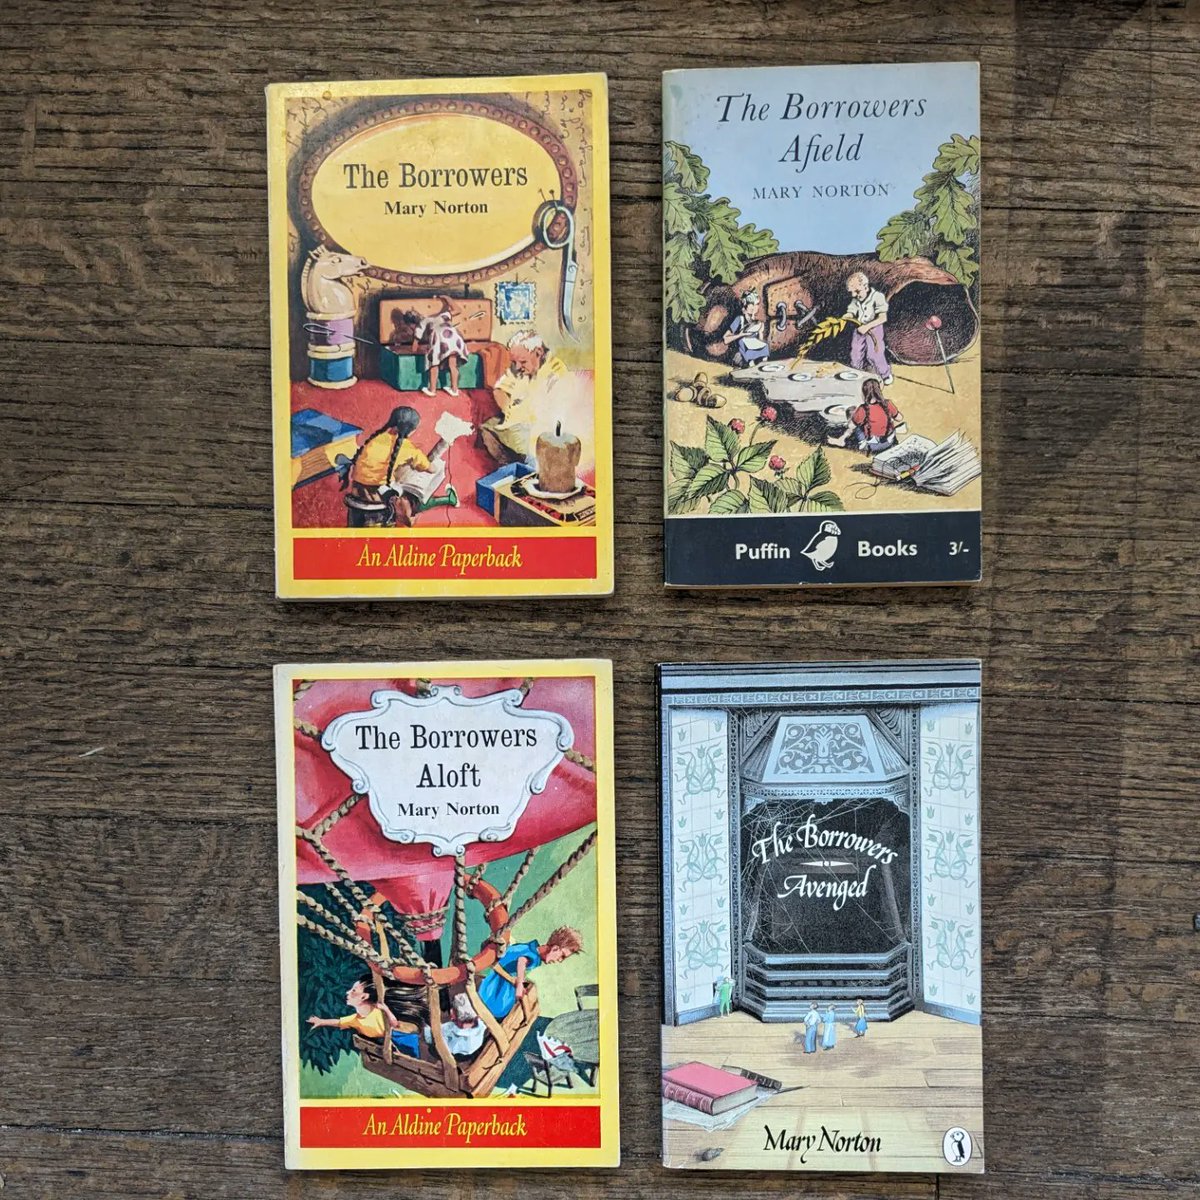 Miniature Characters in Children's Books: The Borrowers. Written by Mary Norton, the first book in the series was published in 1952. #MiniatureCharacters #miniaturecharactersinchildrensbooks #TheBorrowers #InStroud #bookshop #ChildrensFiction #childrensbooks #childrensfantasy